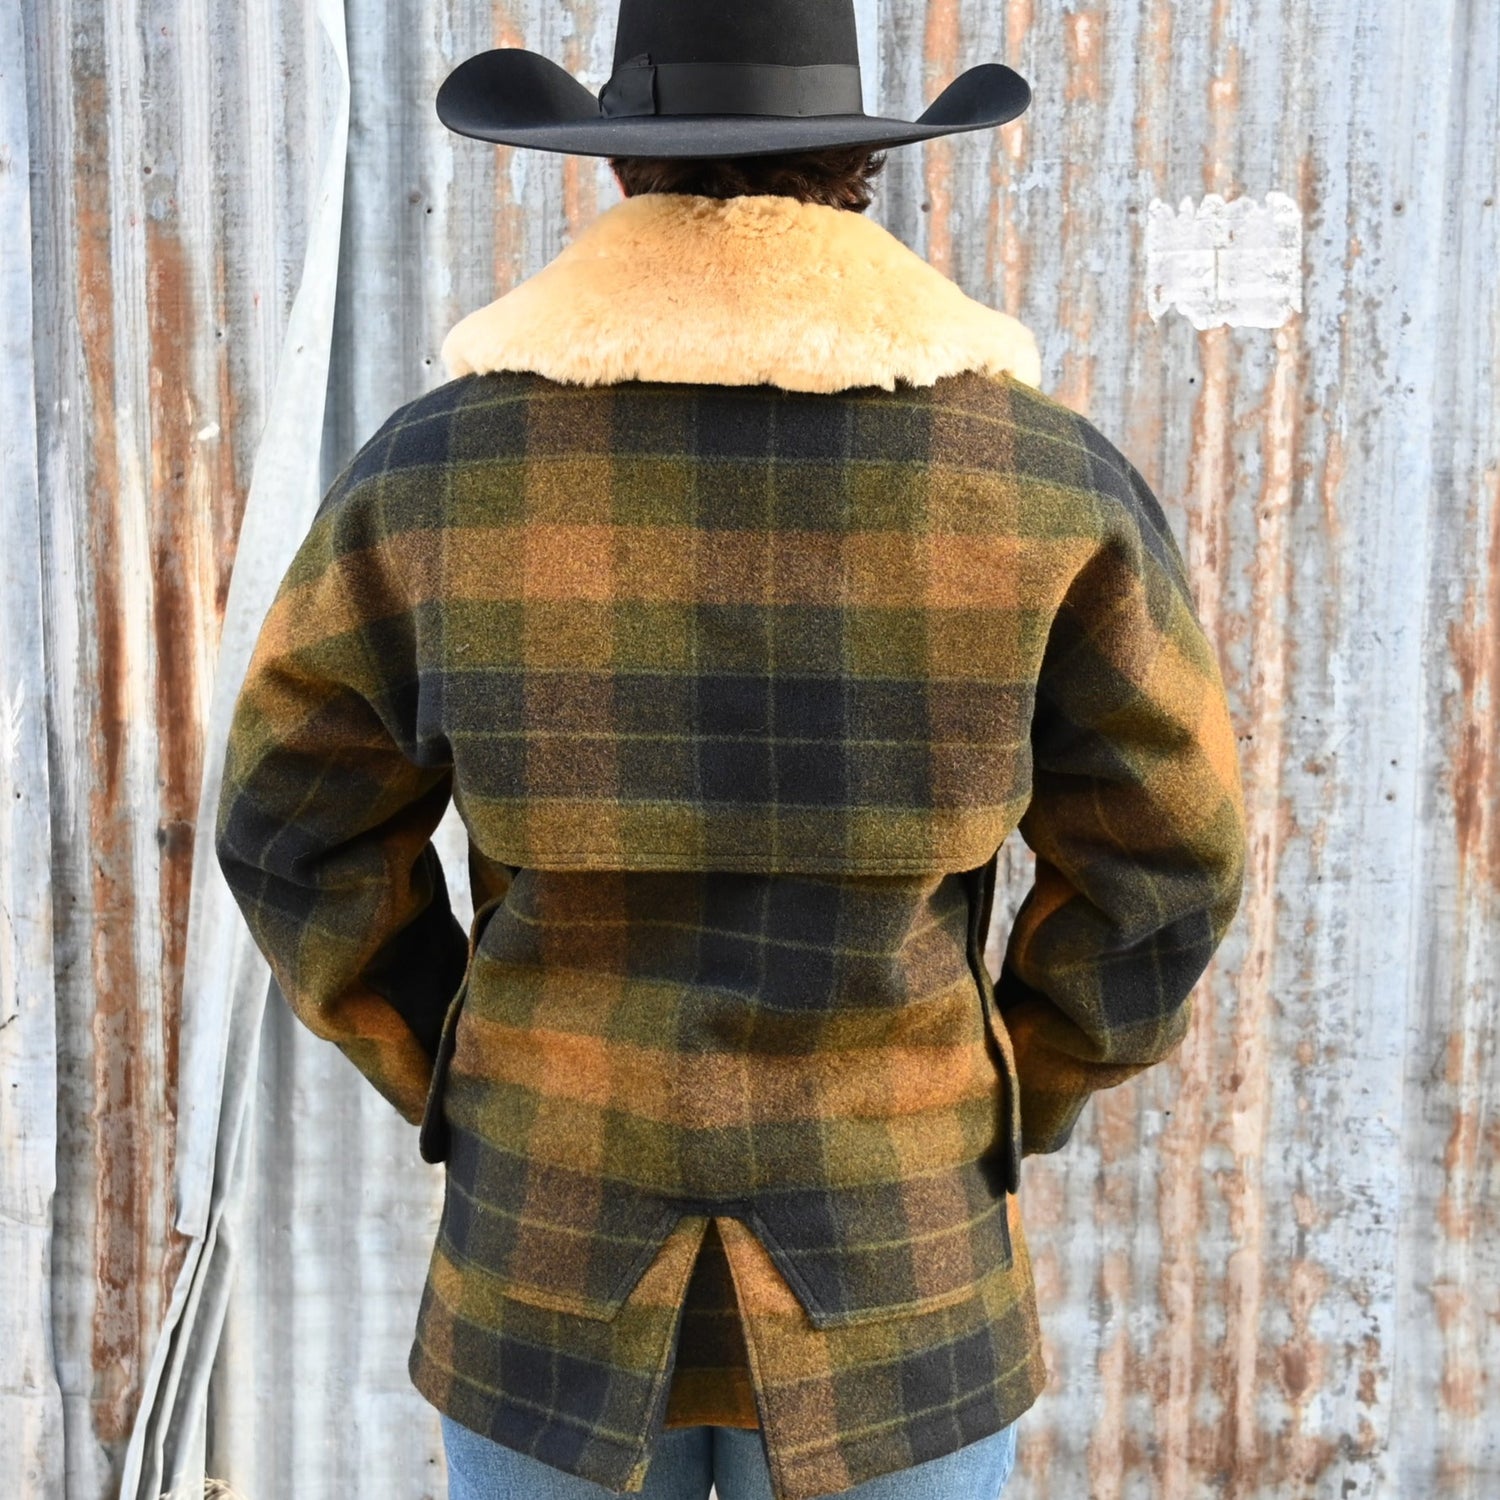 Filson - Lined Wool Packer Coat view of back of jacket size medium